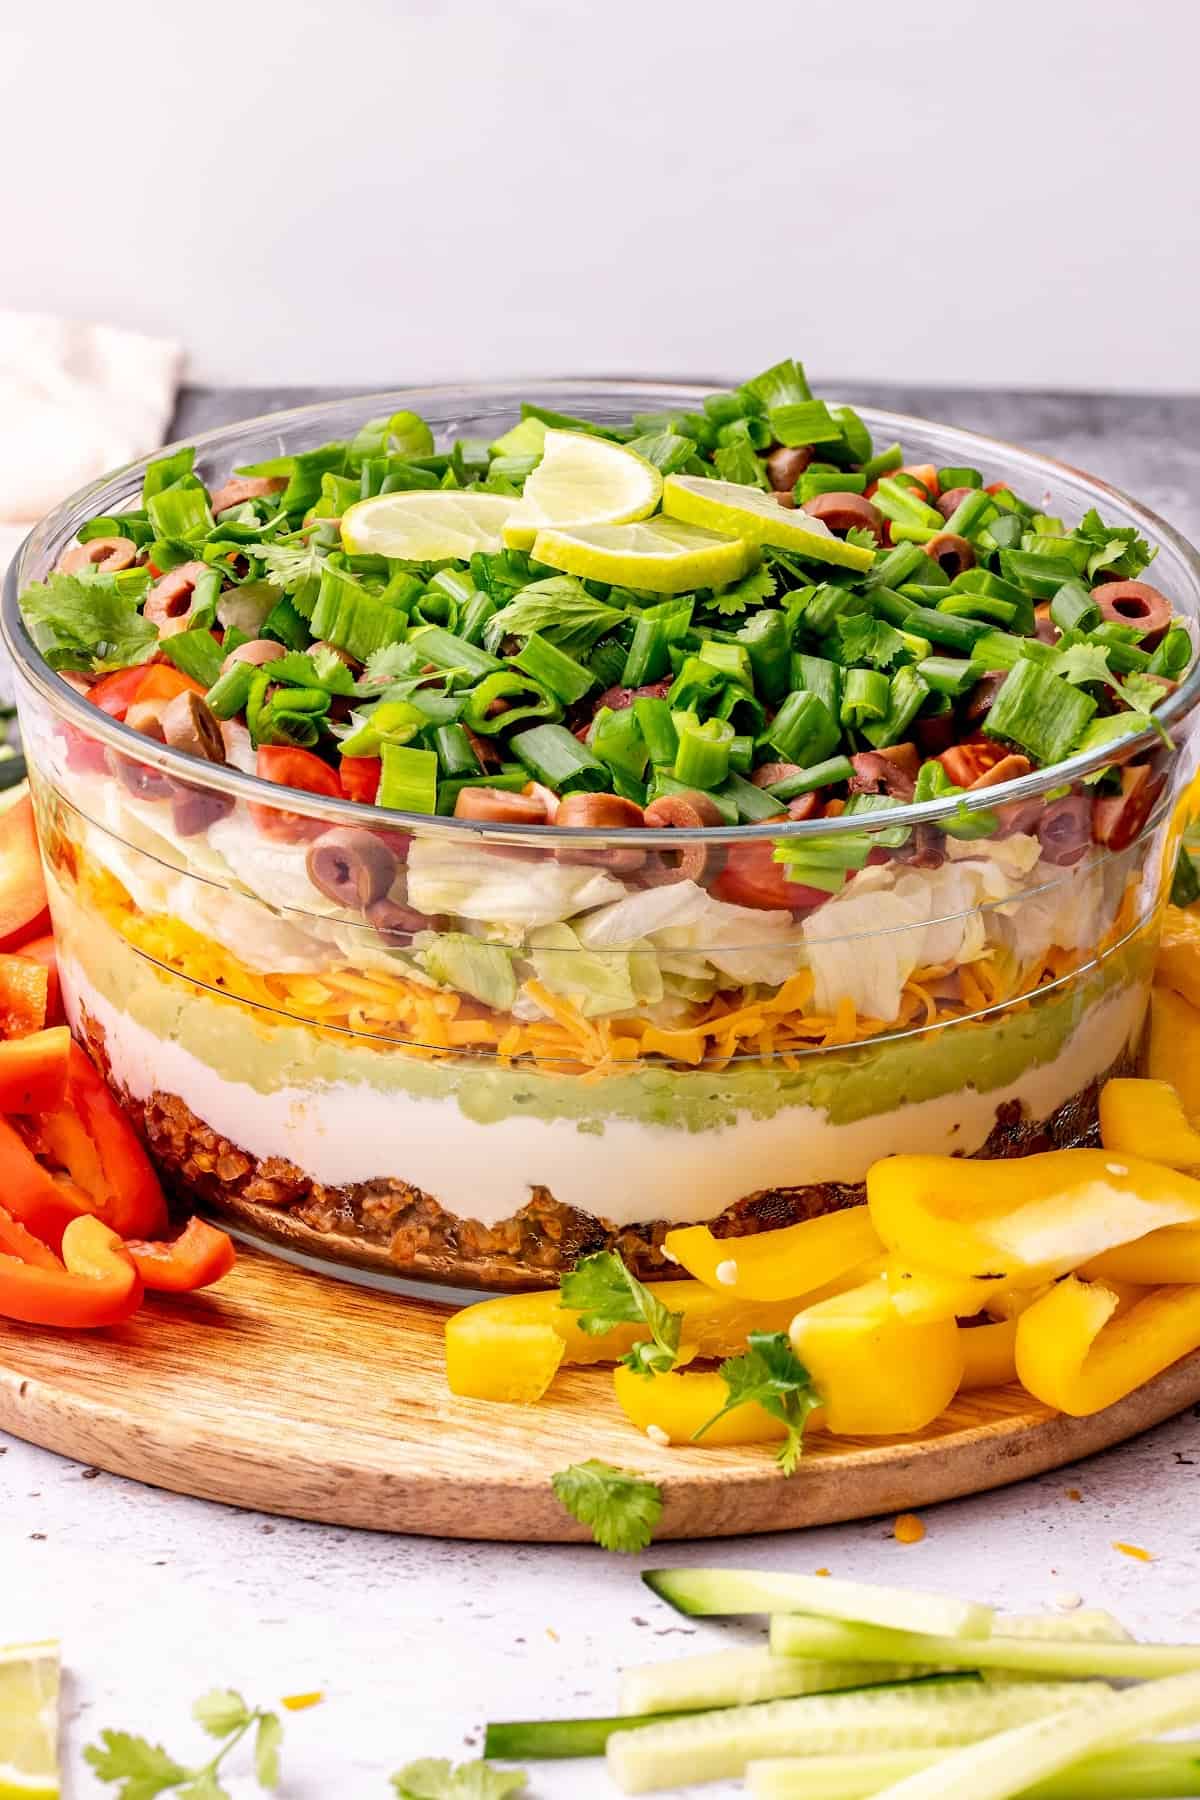 A serving dish of 7 layer dip with lime slices on top, with red bell pepper slices to the left and yellow bell pepper slices to the right